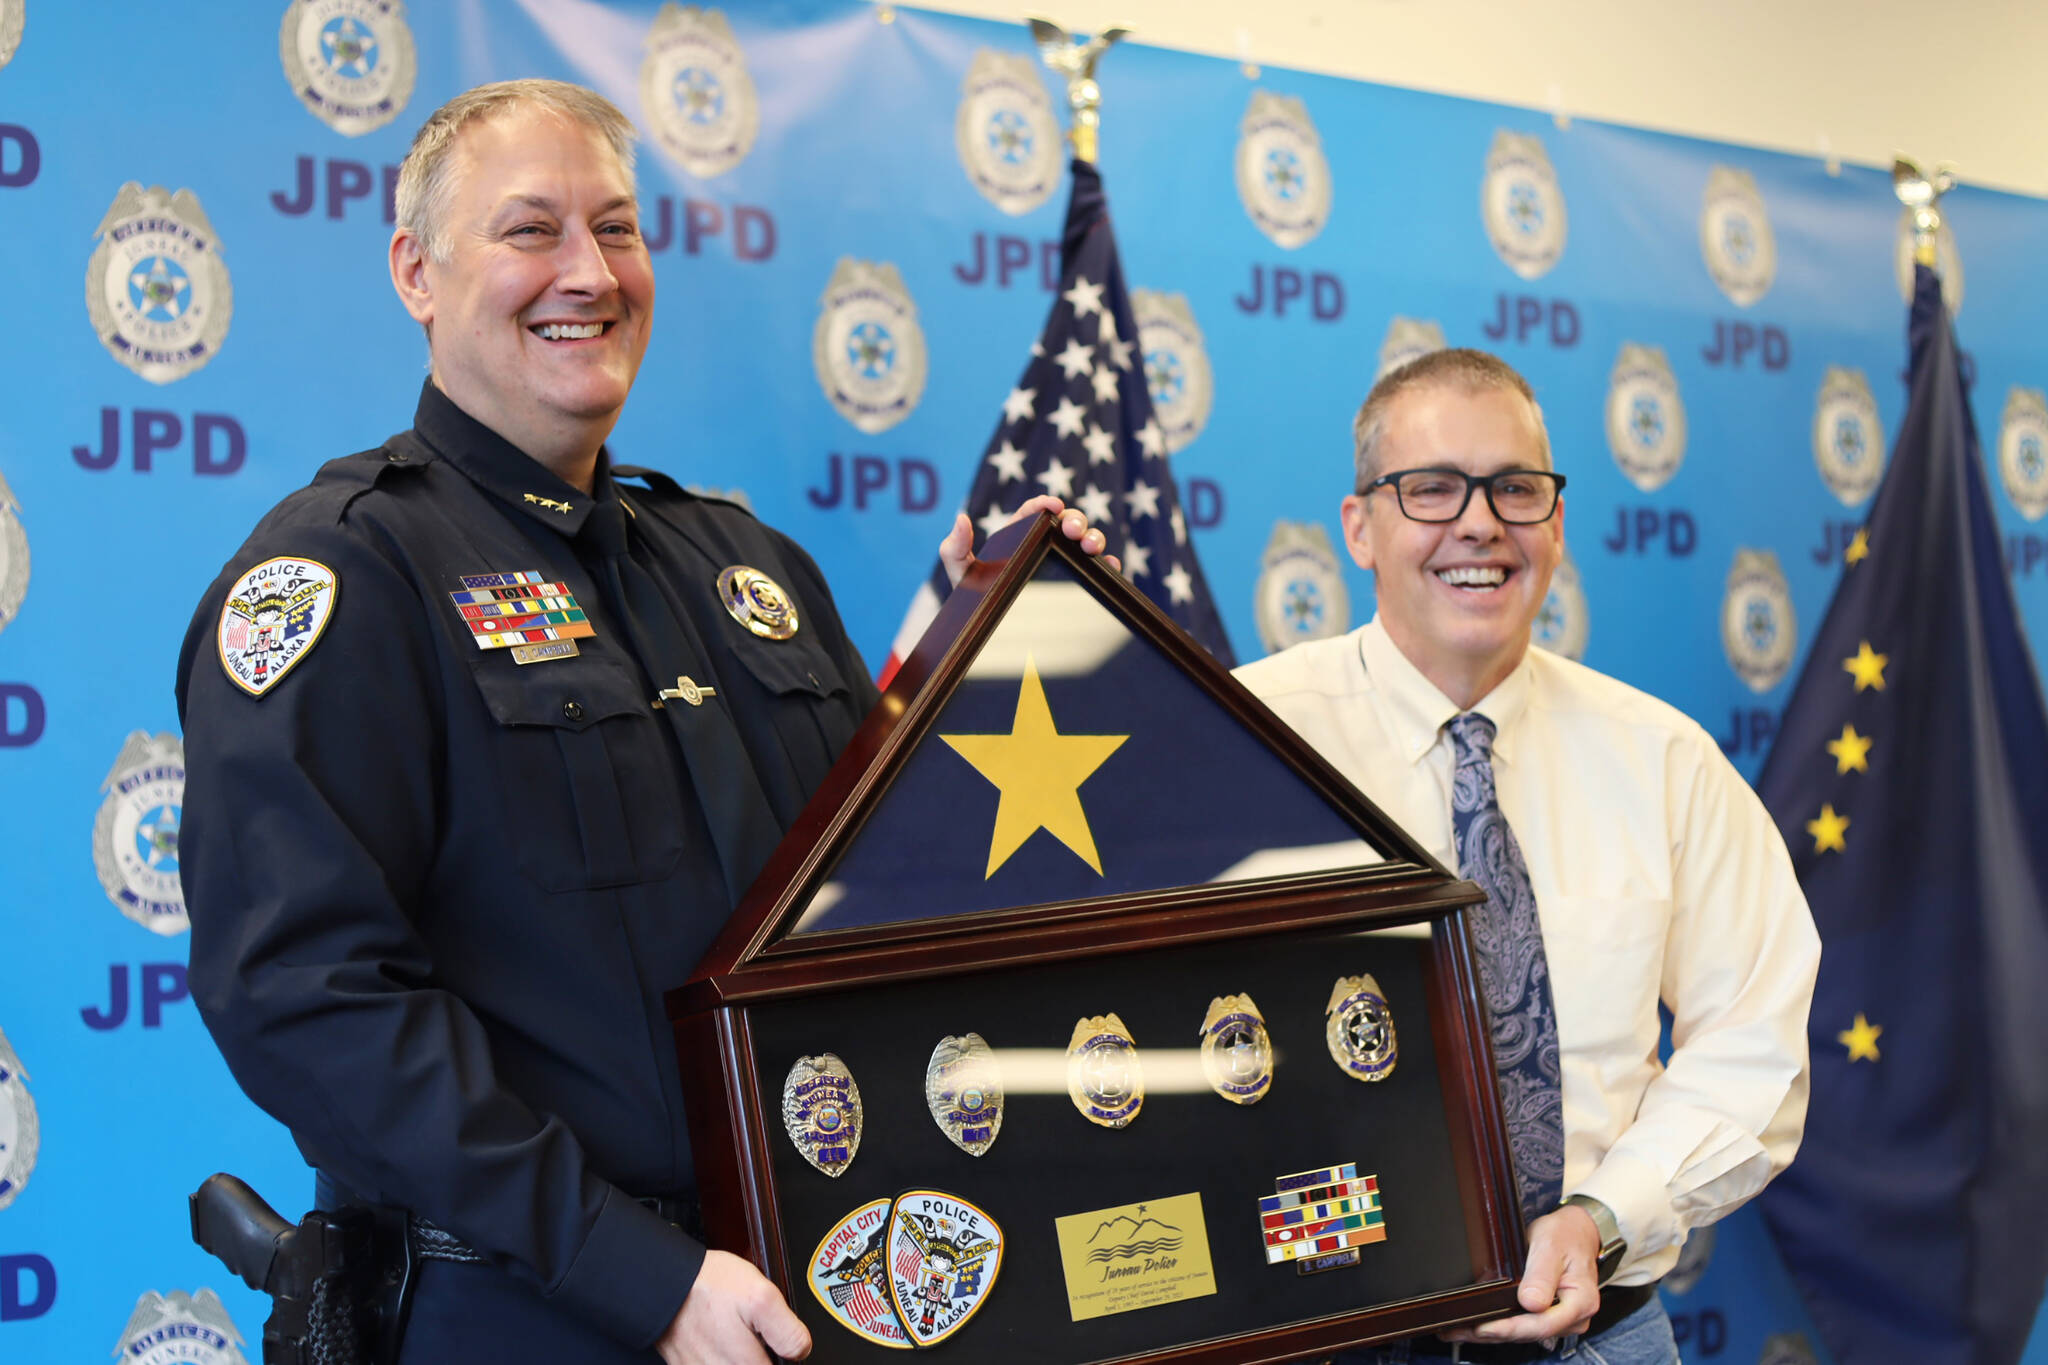 Retiring Deputy Chief David Campbell, left, and City and Borough of Juneau Manager Rorie Watt, right, smile for a photo Friday afternoon during a ceremony held at the Juneau Police Station. (Clarise Larson / Juneau Empire)